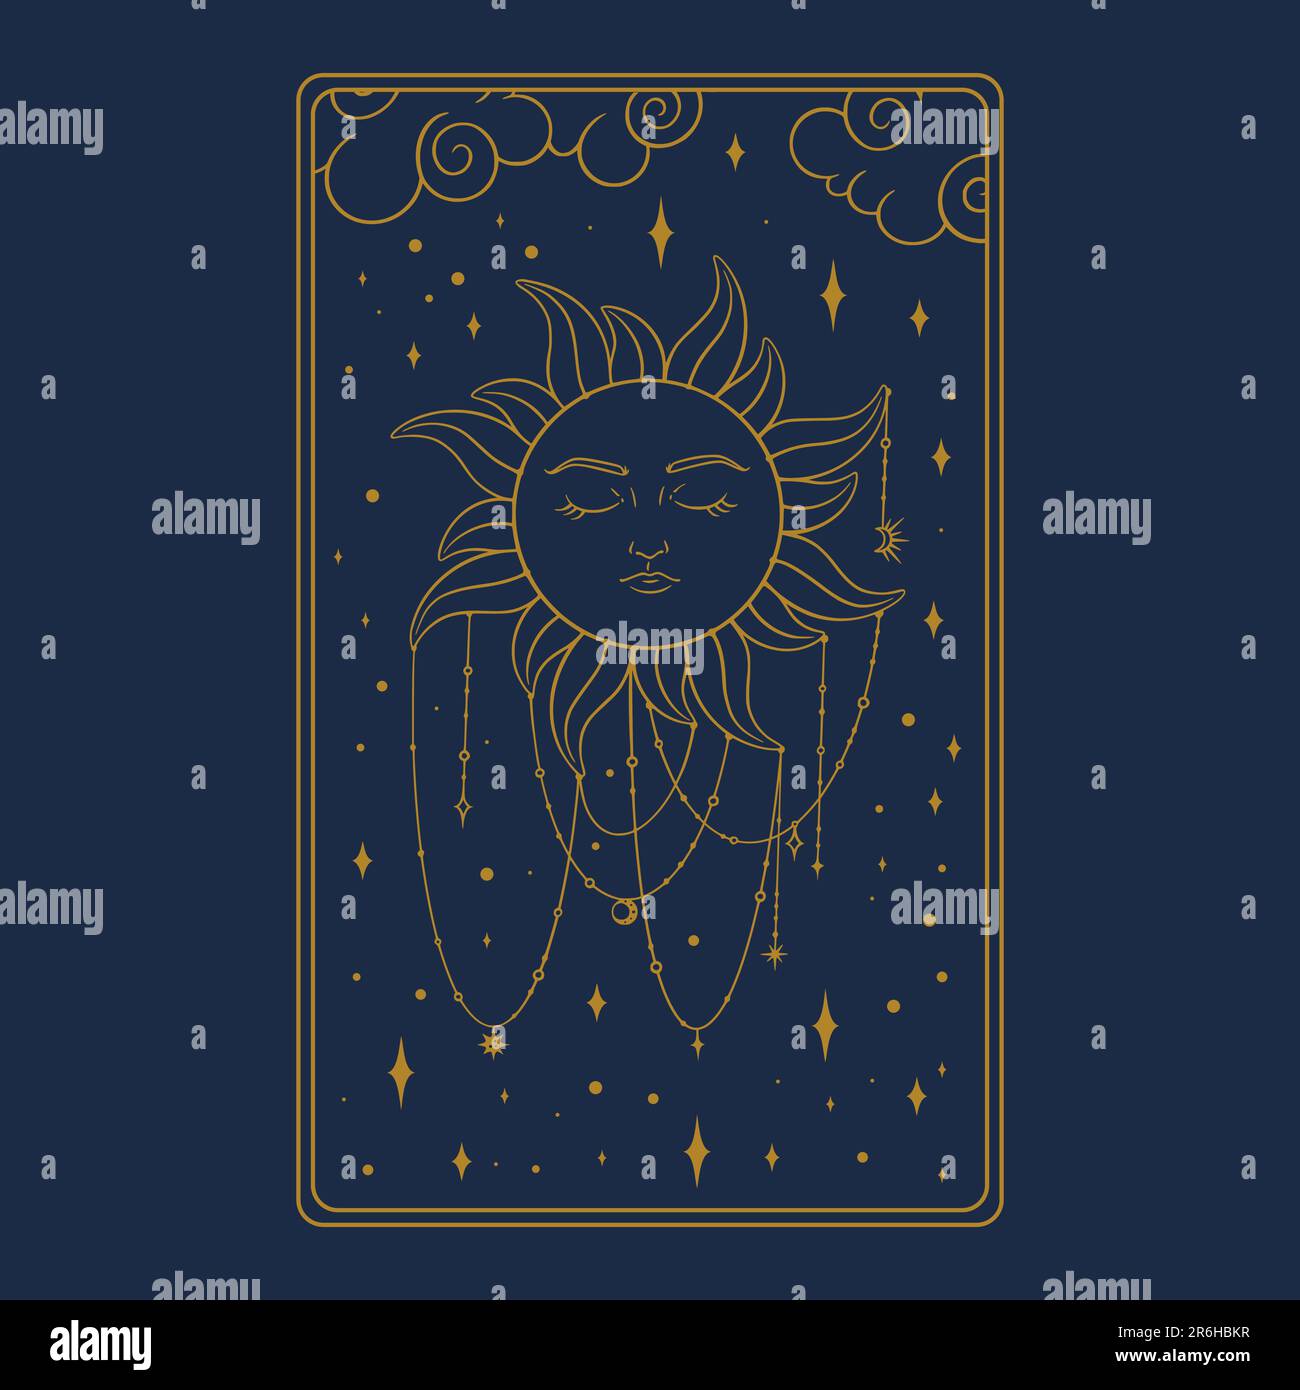 Tarot aesthetic golden card. Outline tarot design for oracle card covers. Vector illustration isolated in blue background Stock Vector